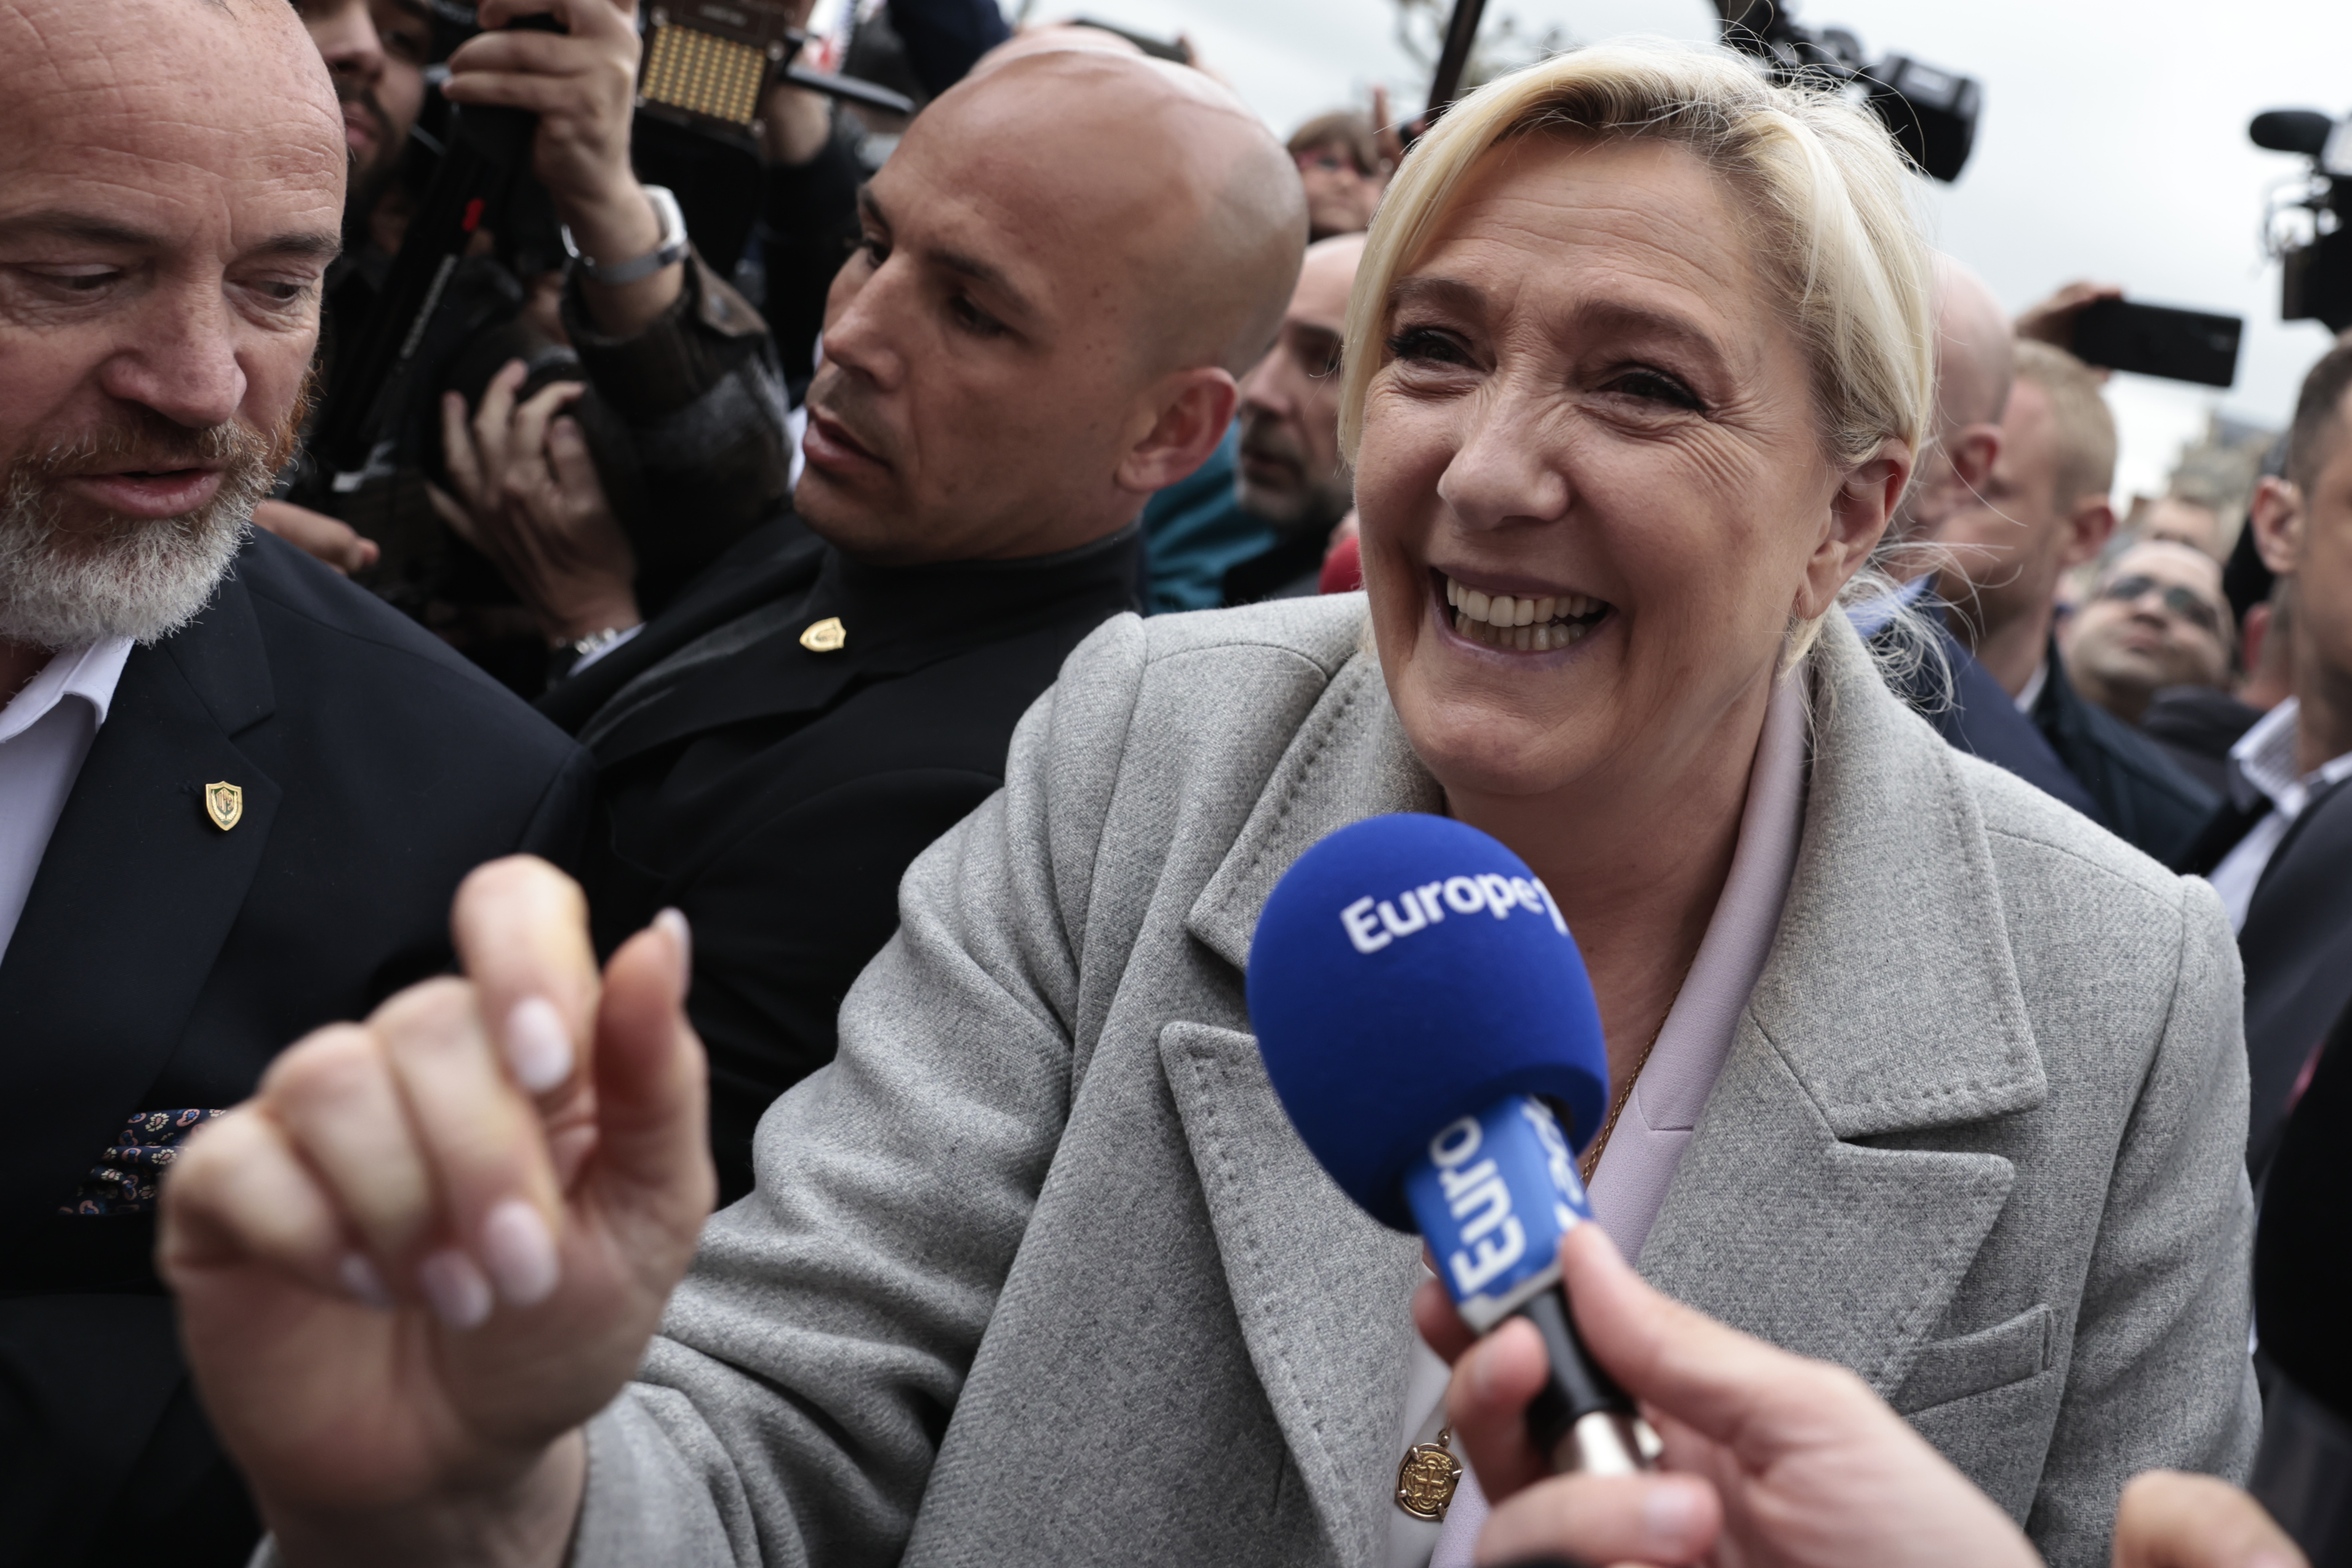 What if Marine LePen wins the French elections?